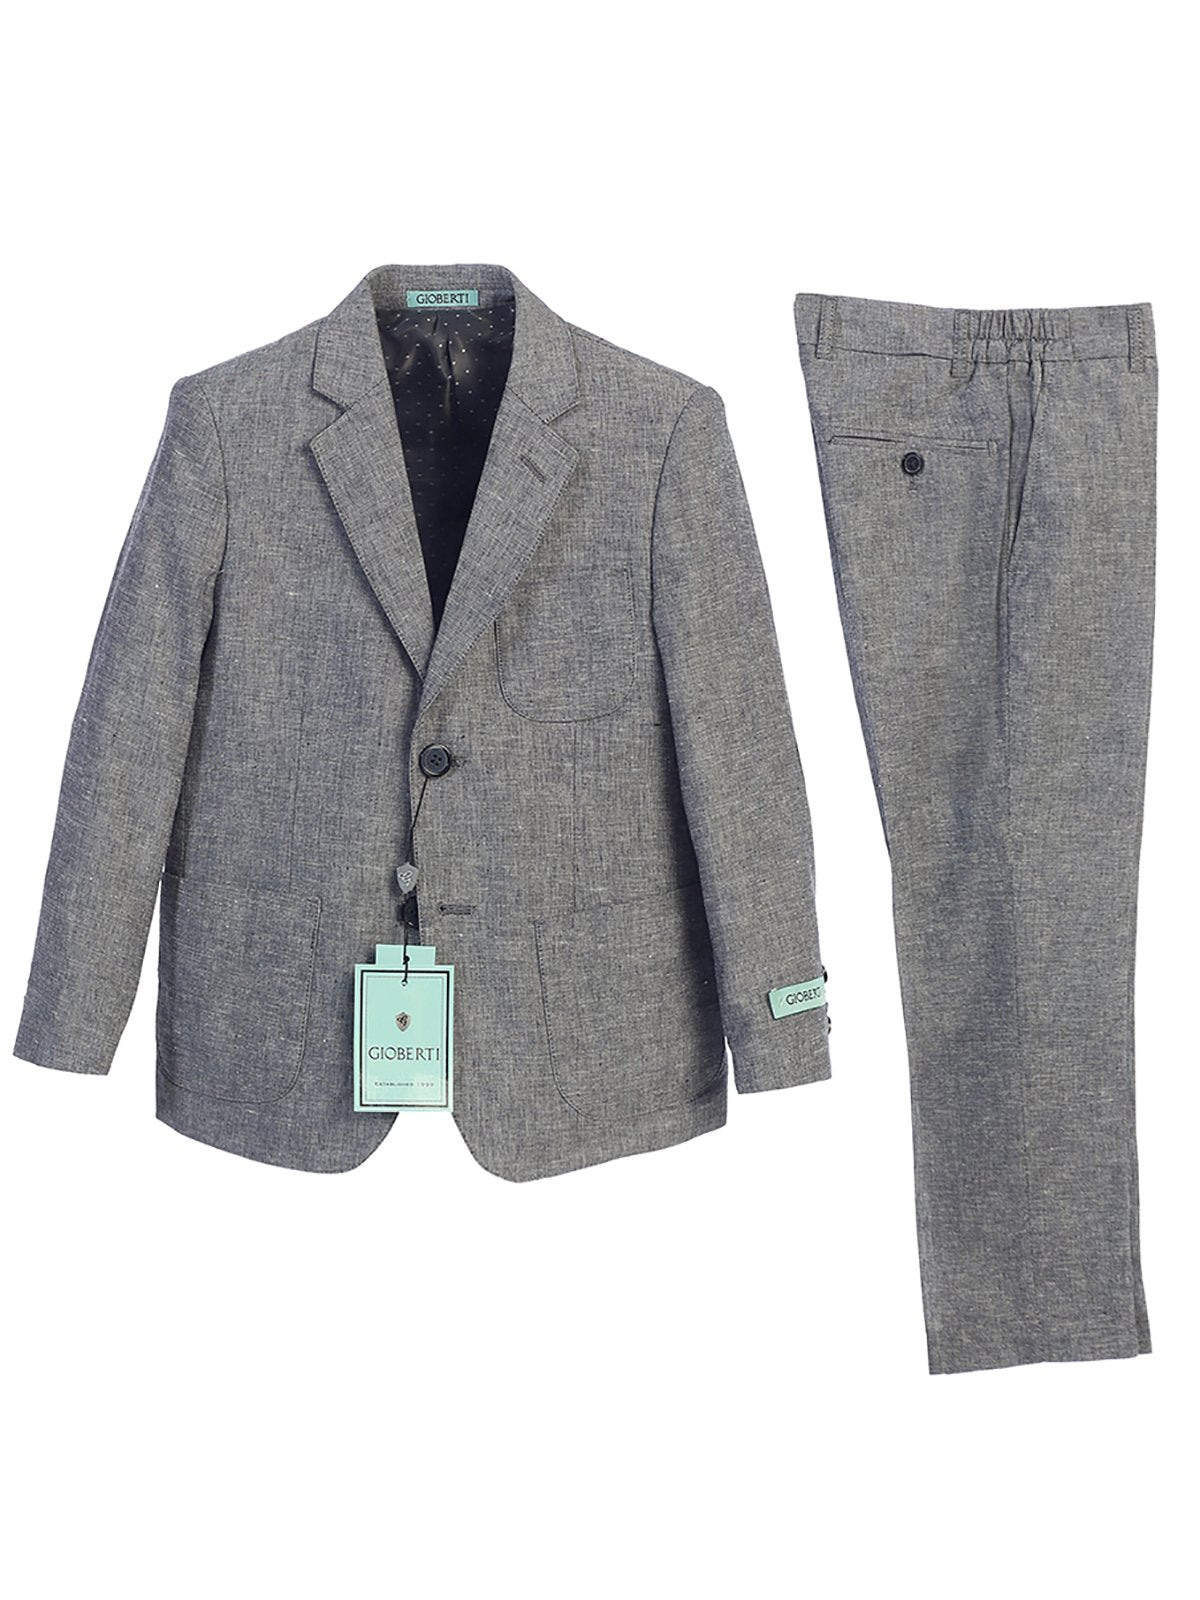 The Grey Linen Suit Jacket & Pants, a symbol of sophistication, bring an air of elegance to ring bearers at weddings.